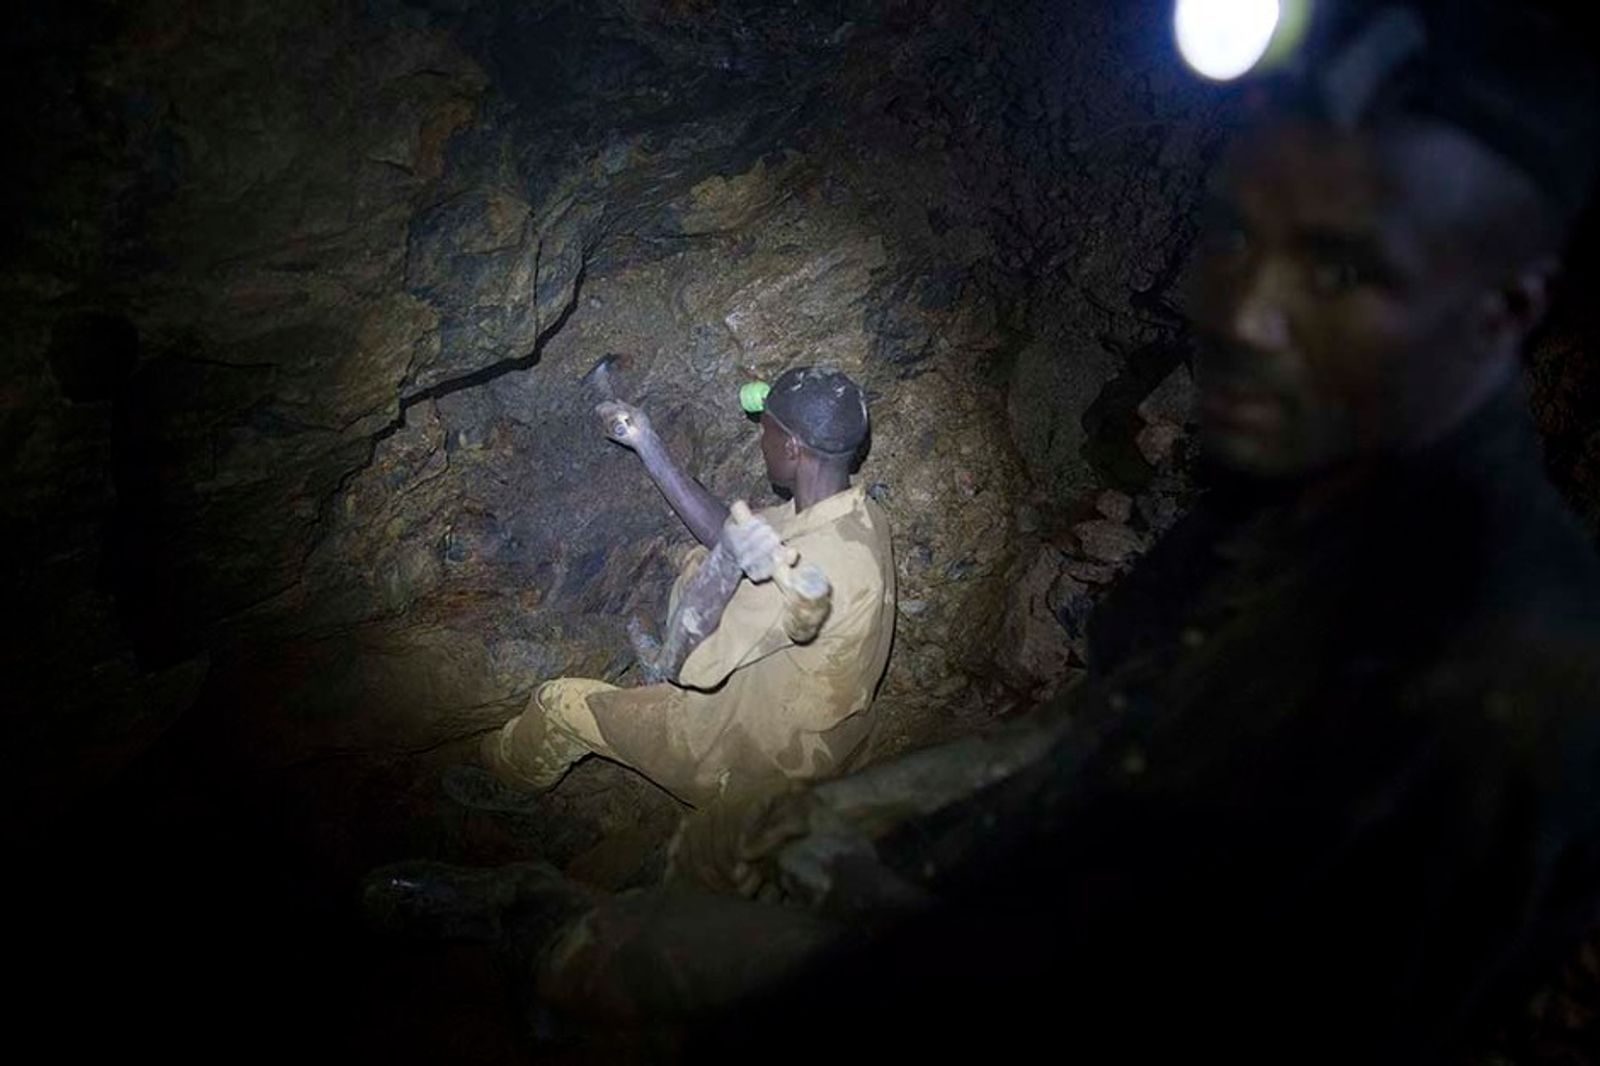 © Toby Binder - Image from the conflict-free mining in Eastern Congo photography project